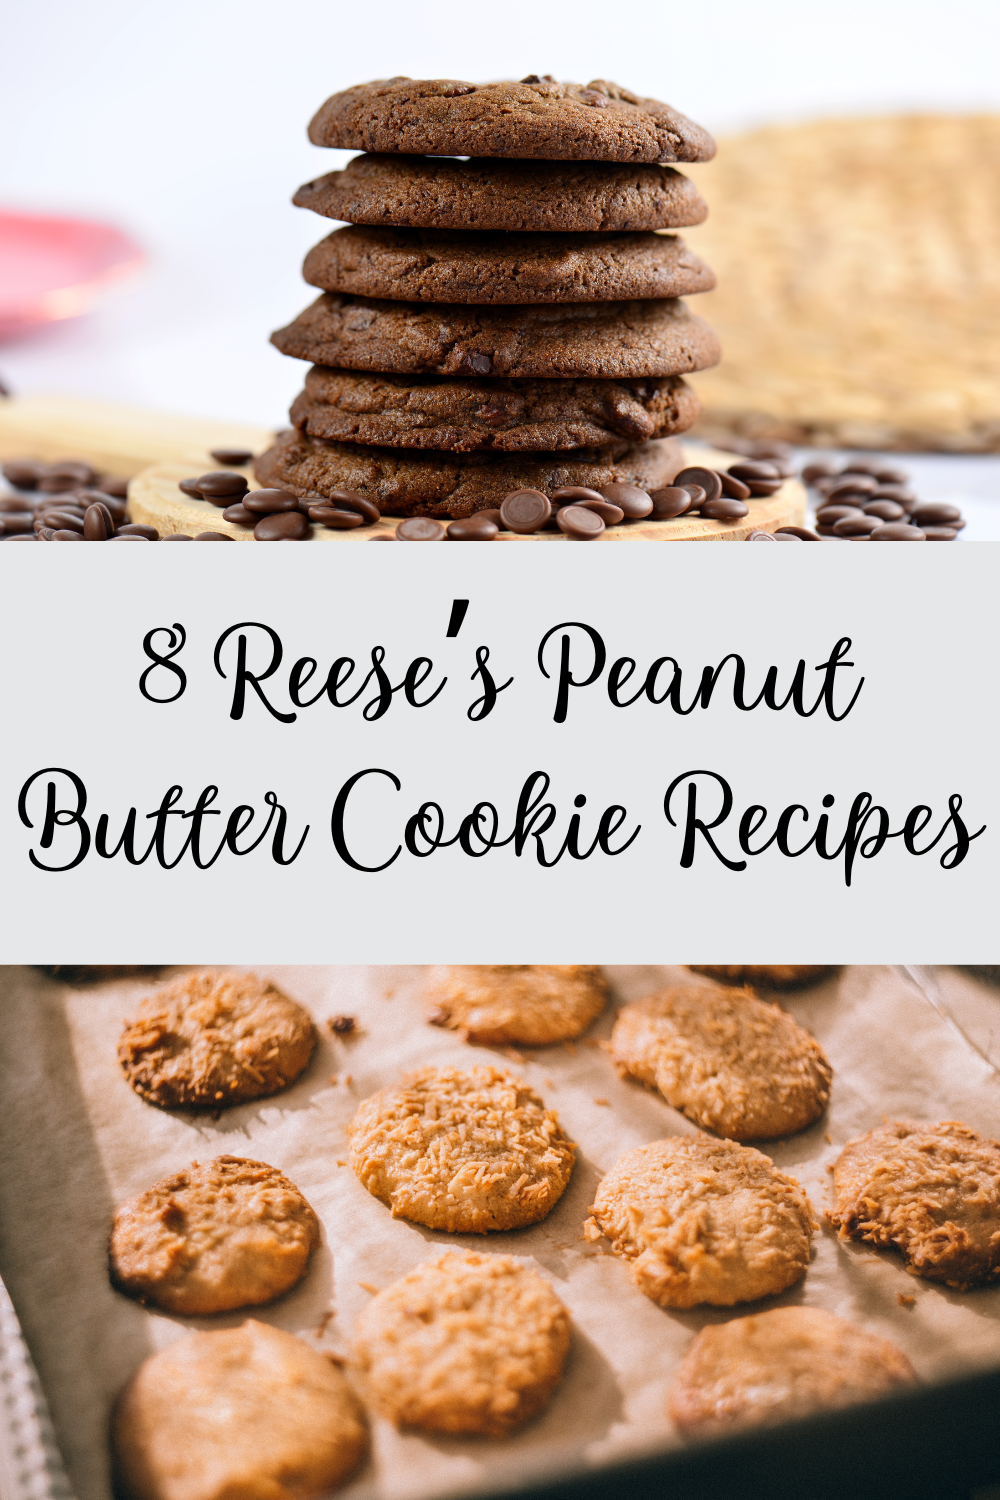 Reese's Peanut Butter Cookie Recipes